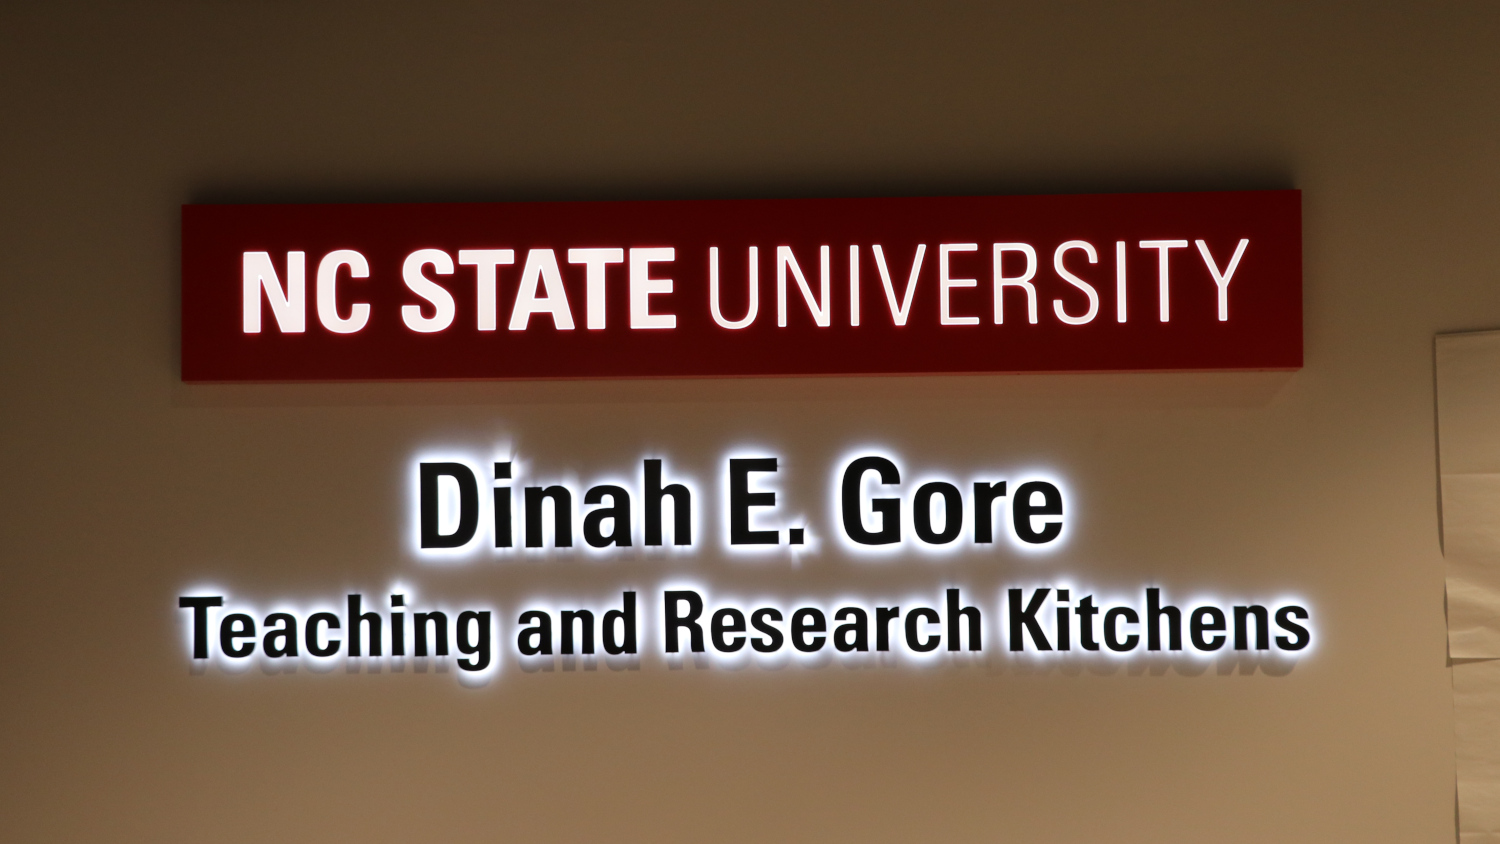 NC State University Dinah E. Gore Teaching and Research Kitchens signage